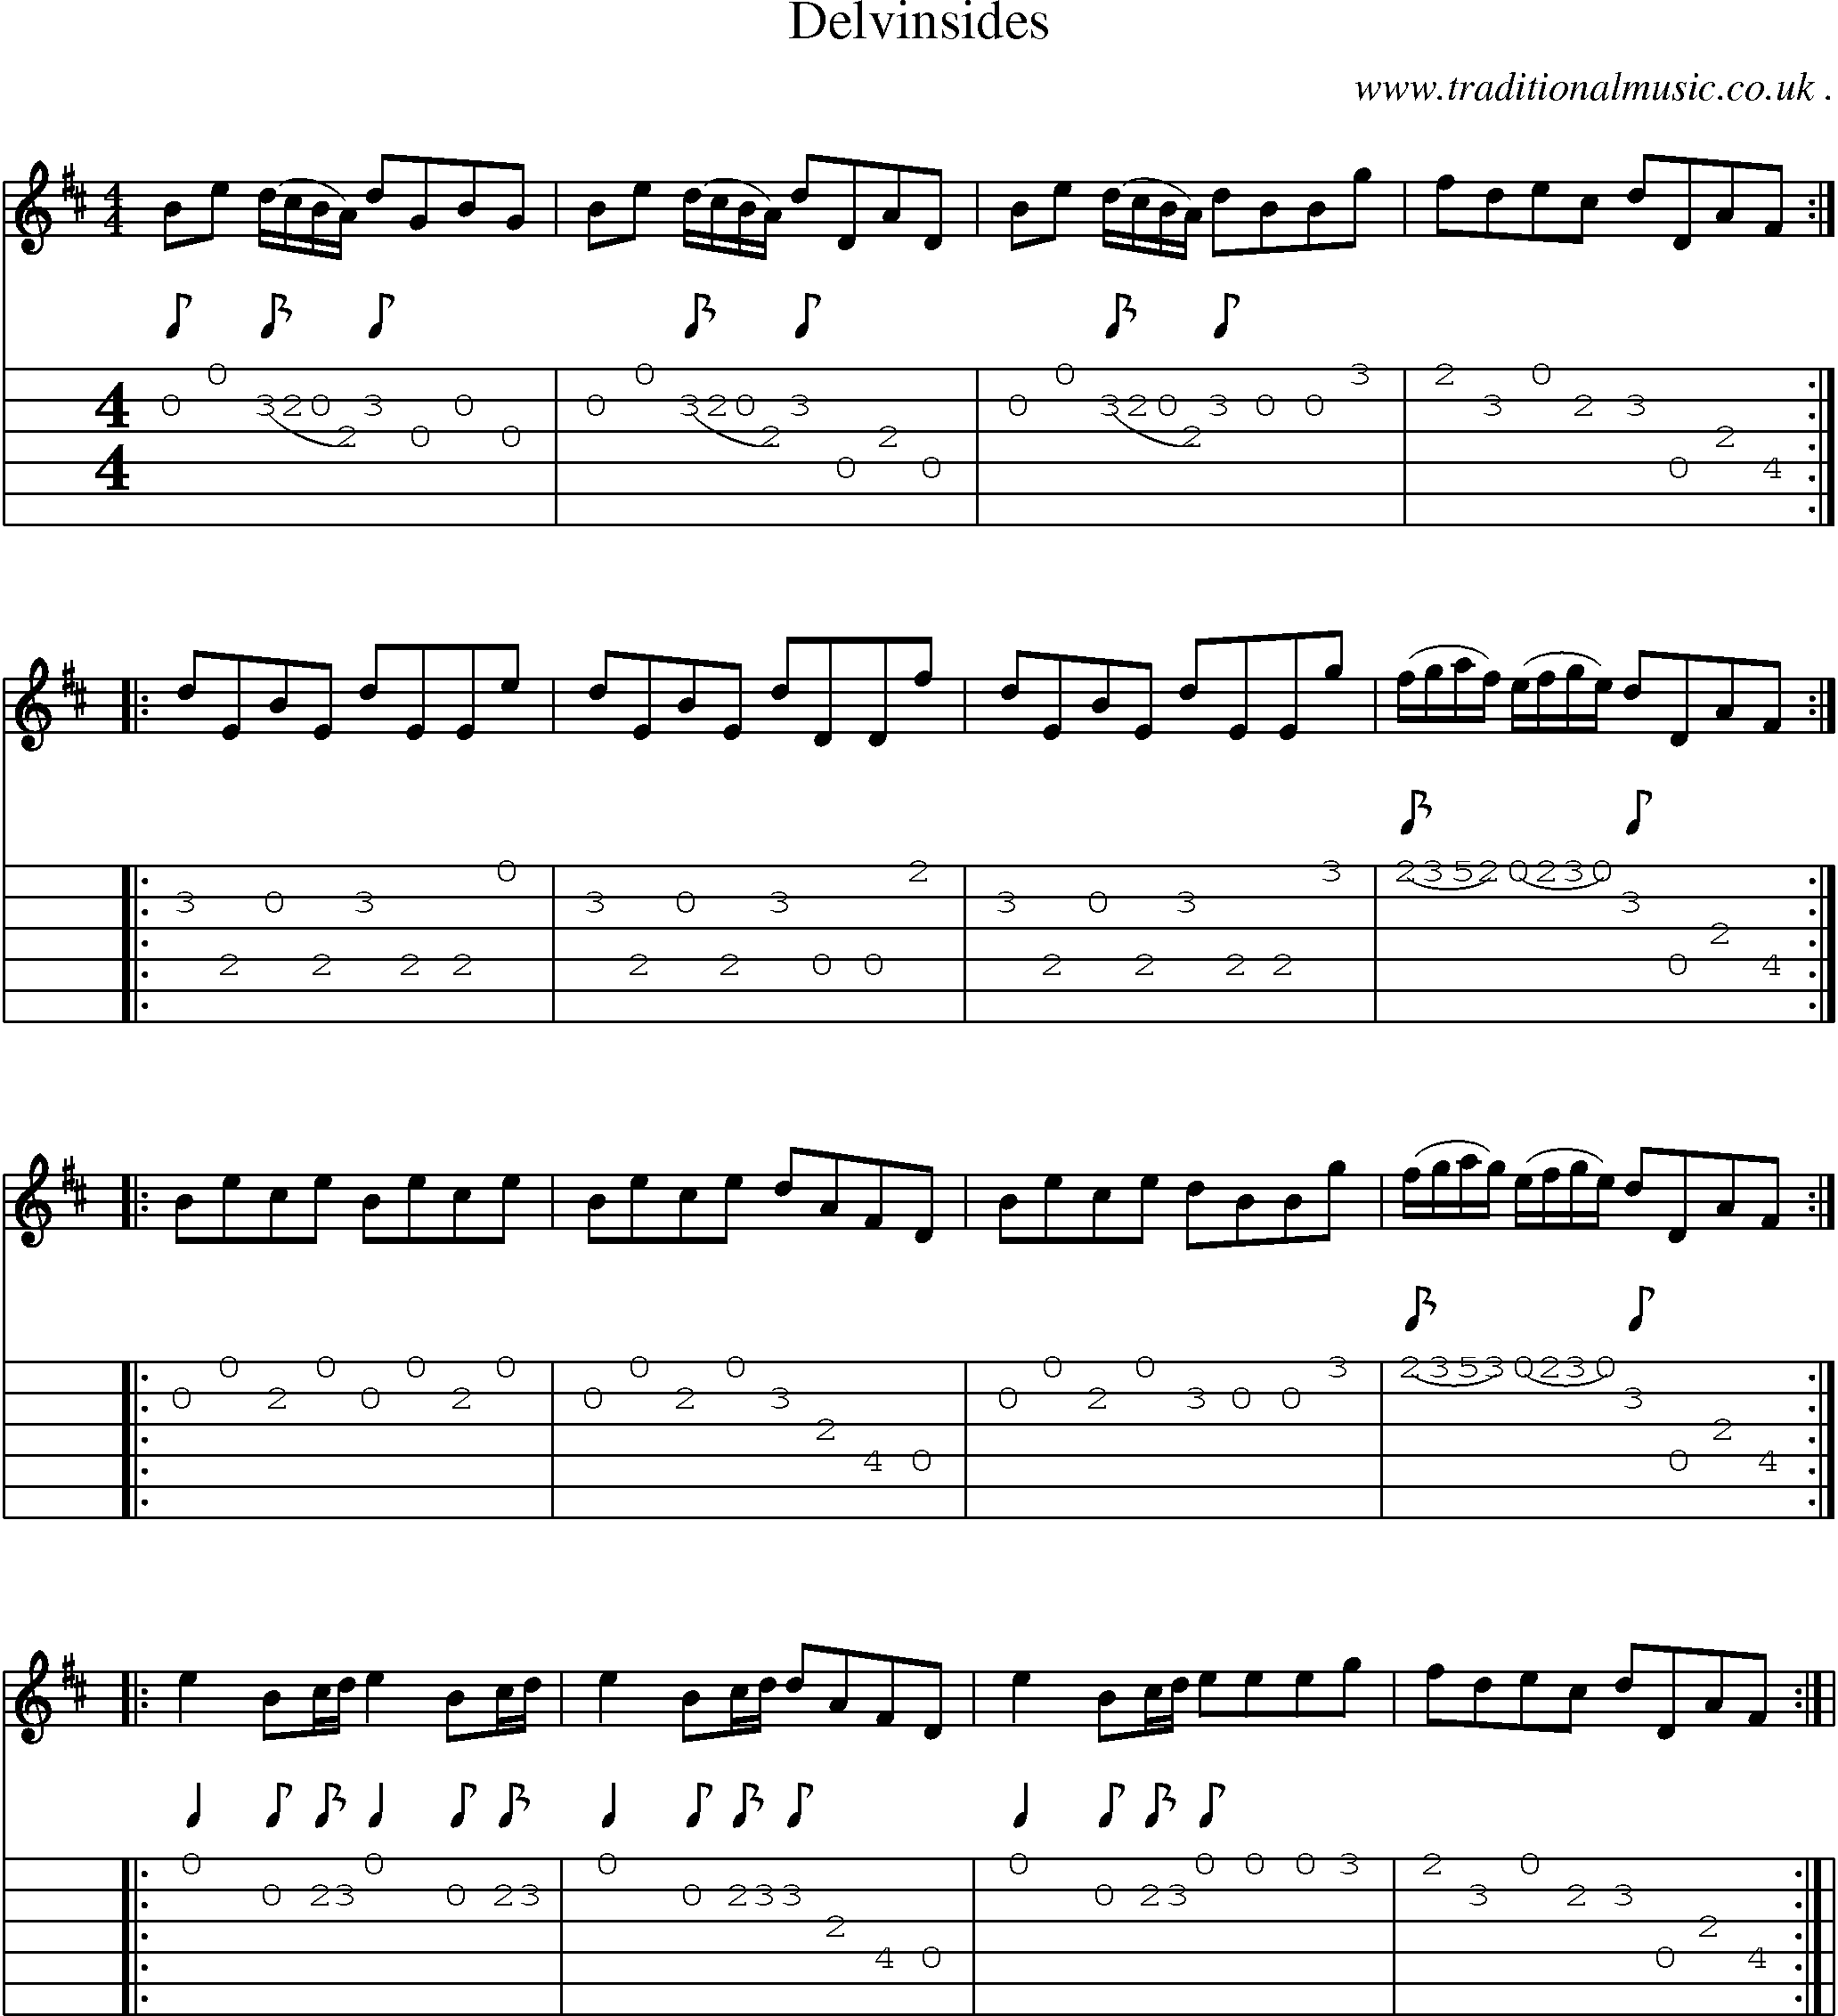 Sheet-Music and Guitar Tabs for Delvinsides